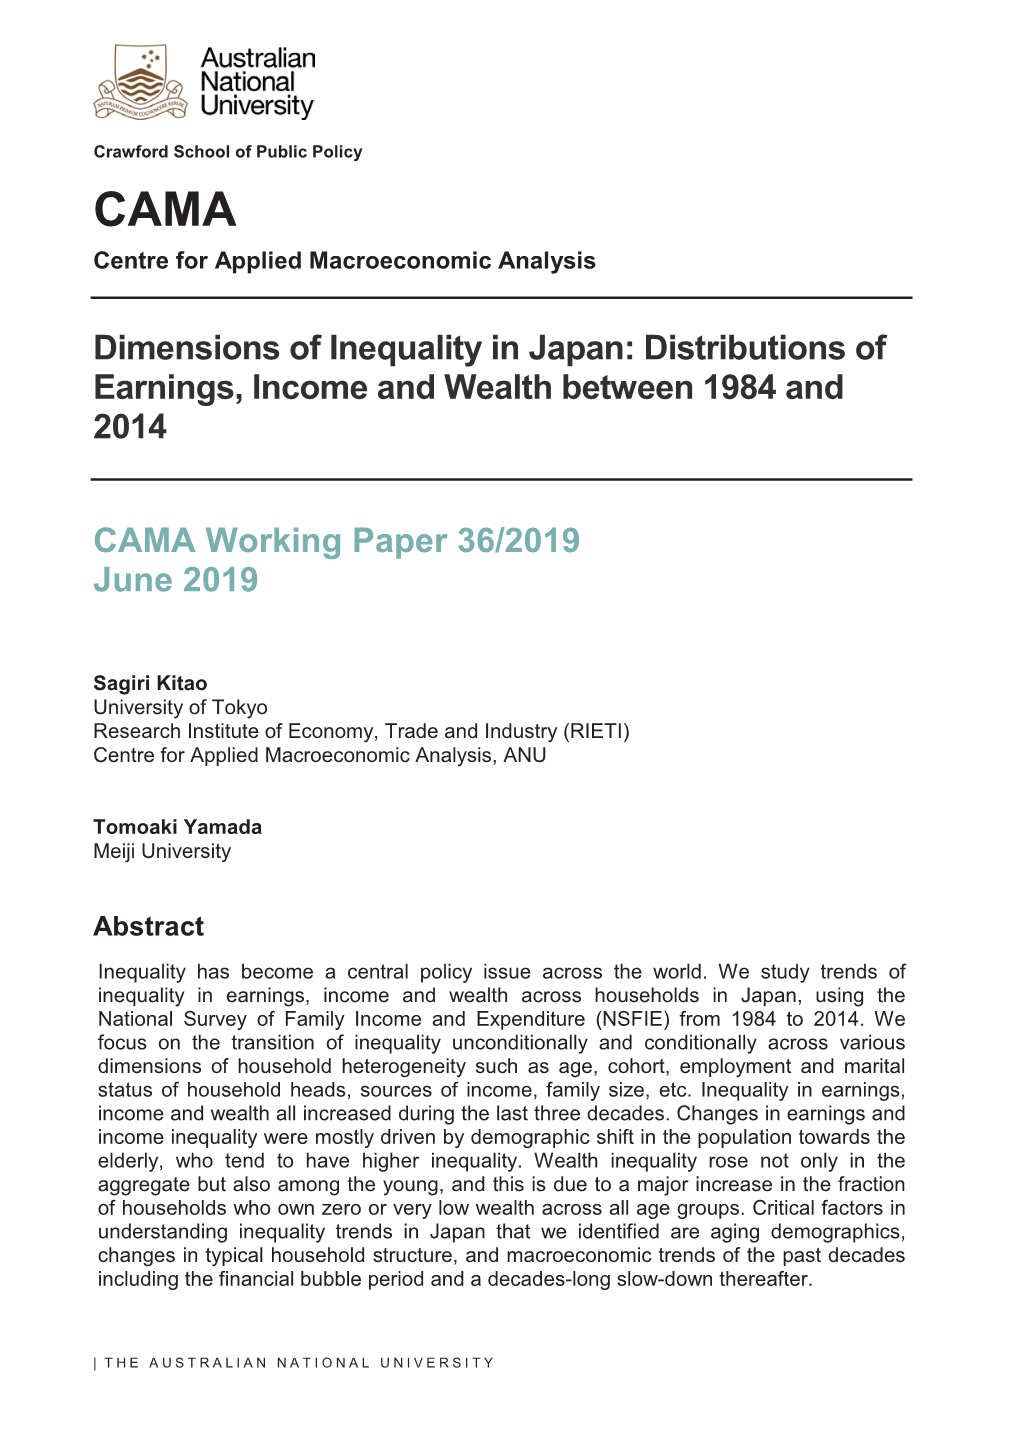 Dimensions of Inequality in Japan: Distributions of Earnings, Income and Wealth Between 1984 and 2014